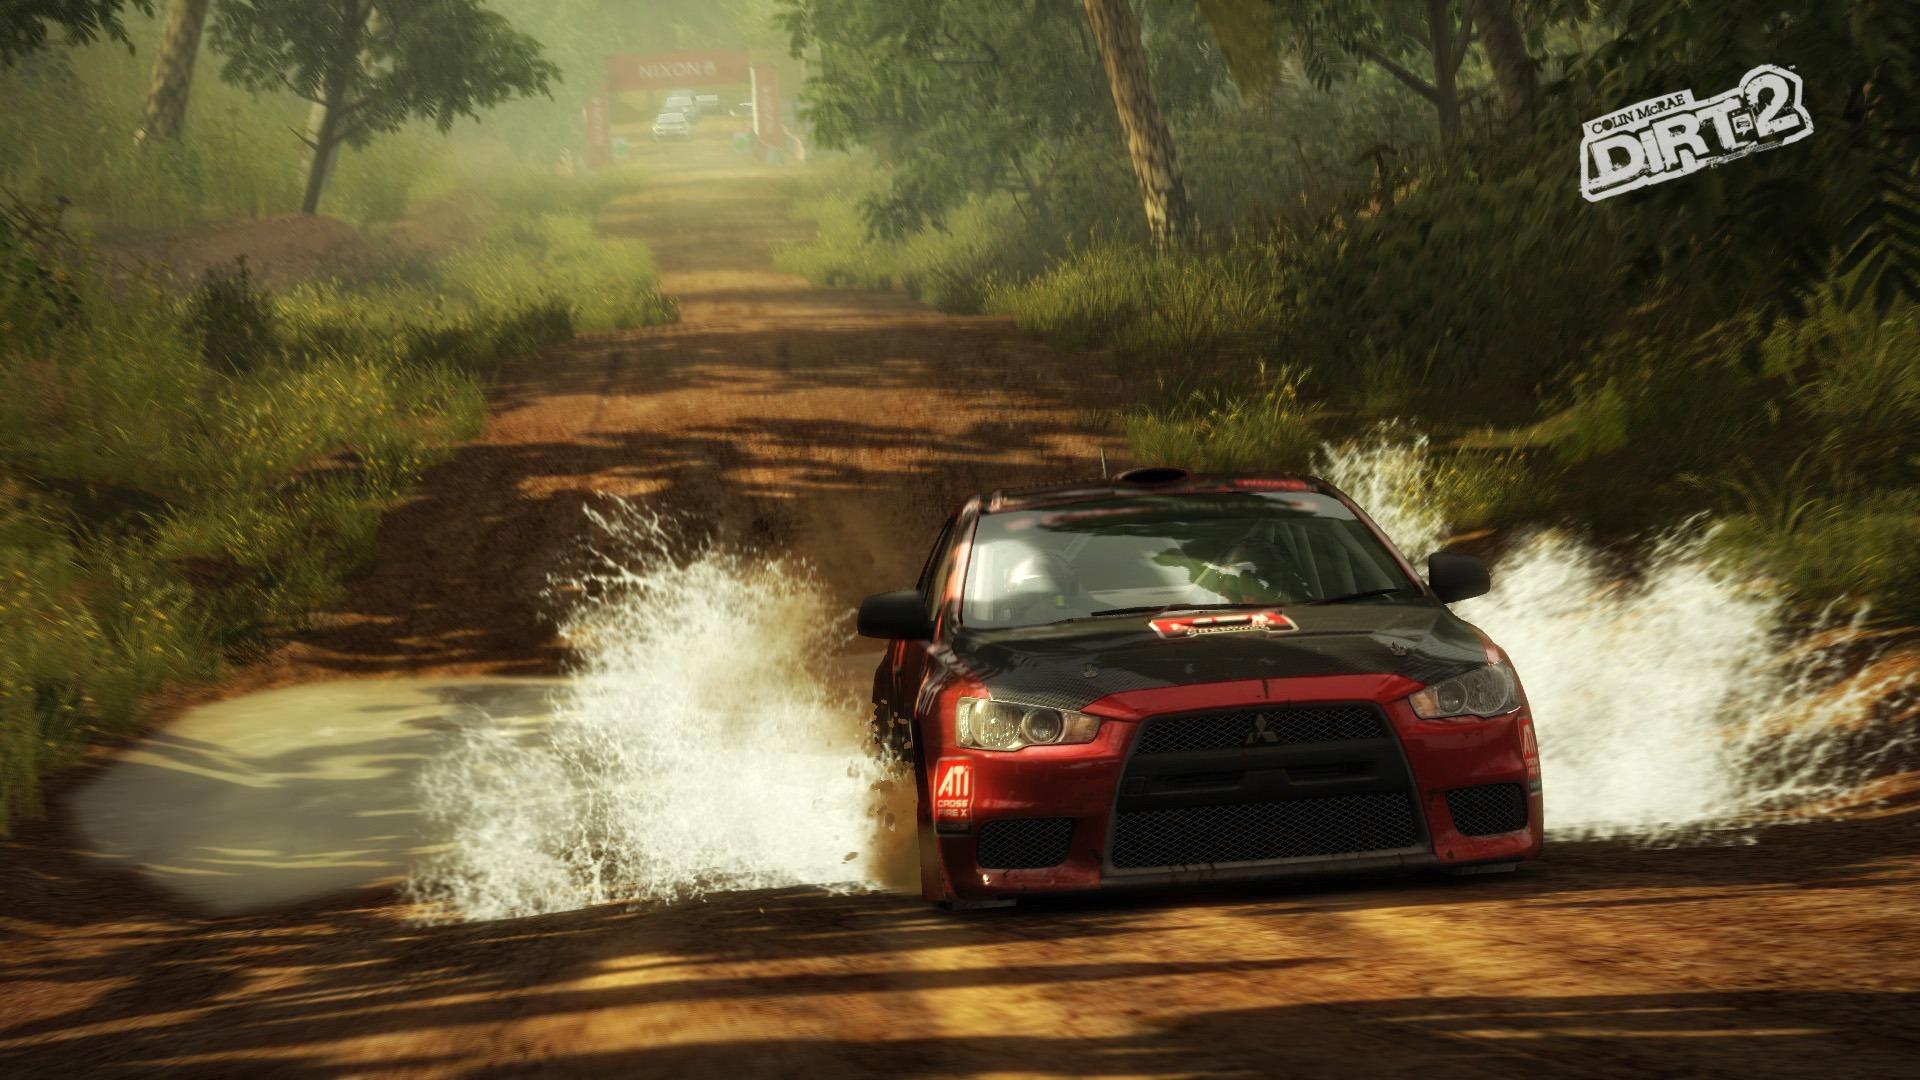 Colin McRae: Dirt 2 HD Wallpaper and Background Image